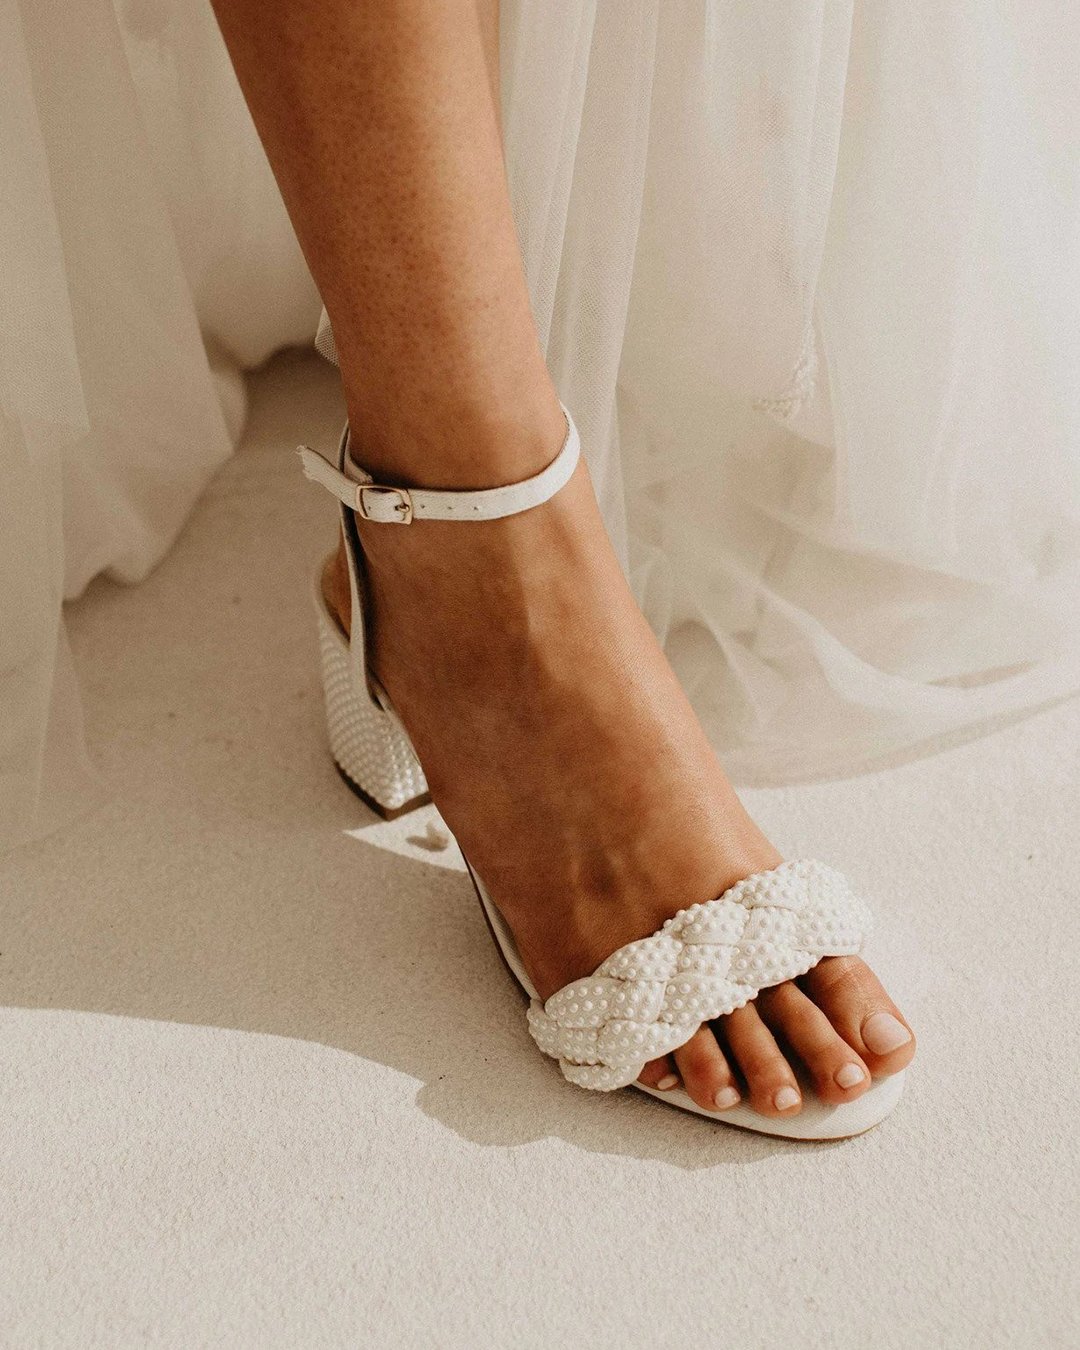 beach wedding shoes sandals with stones forever soles